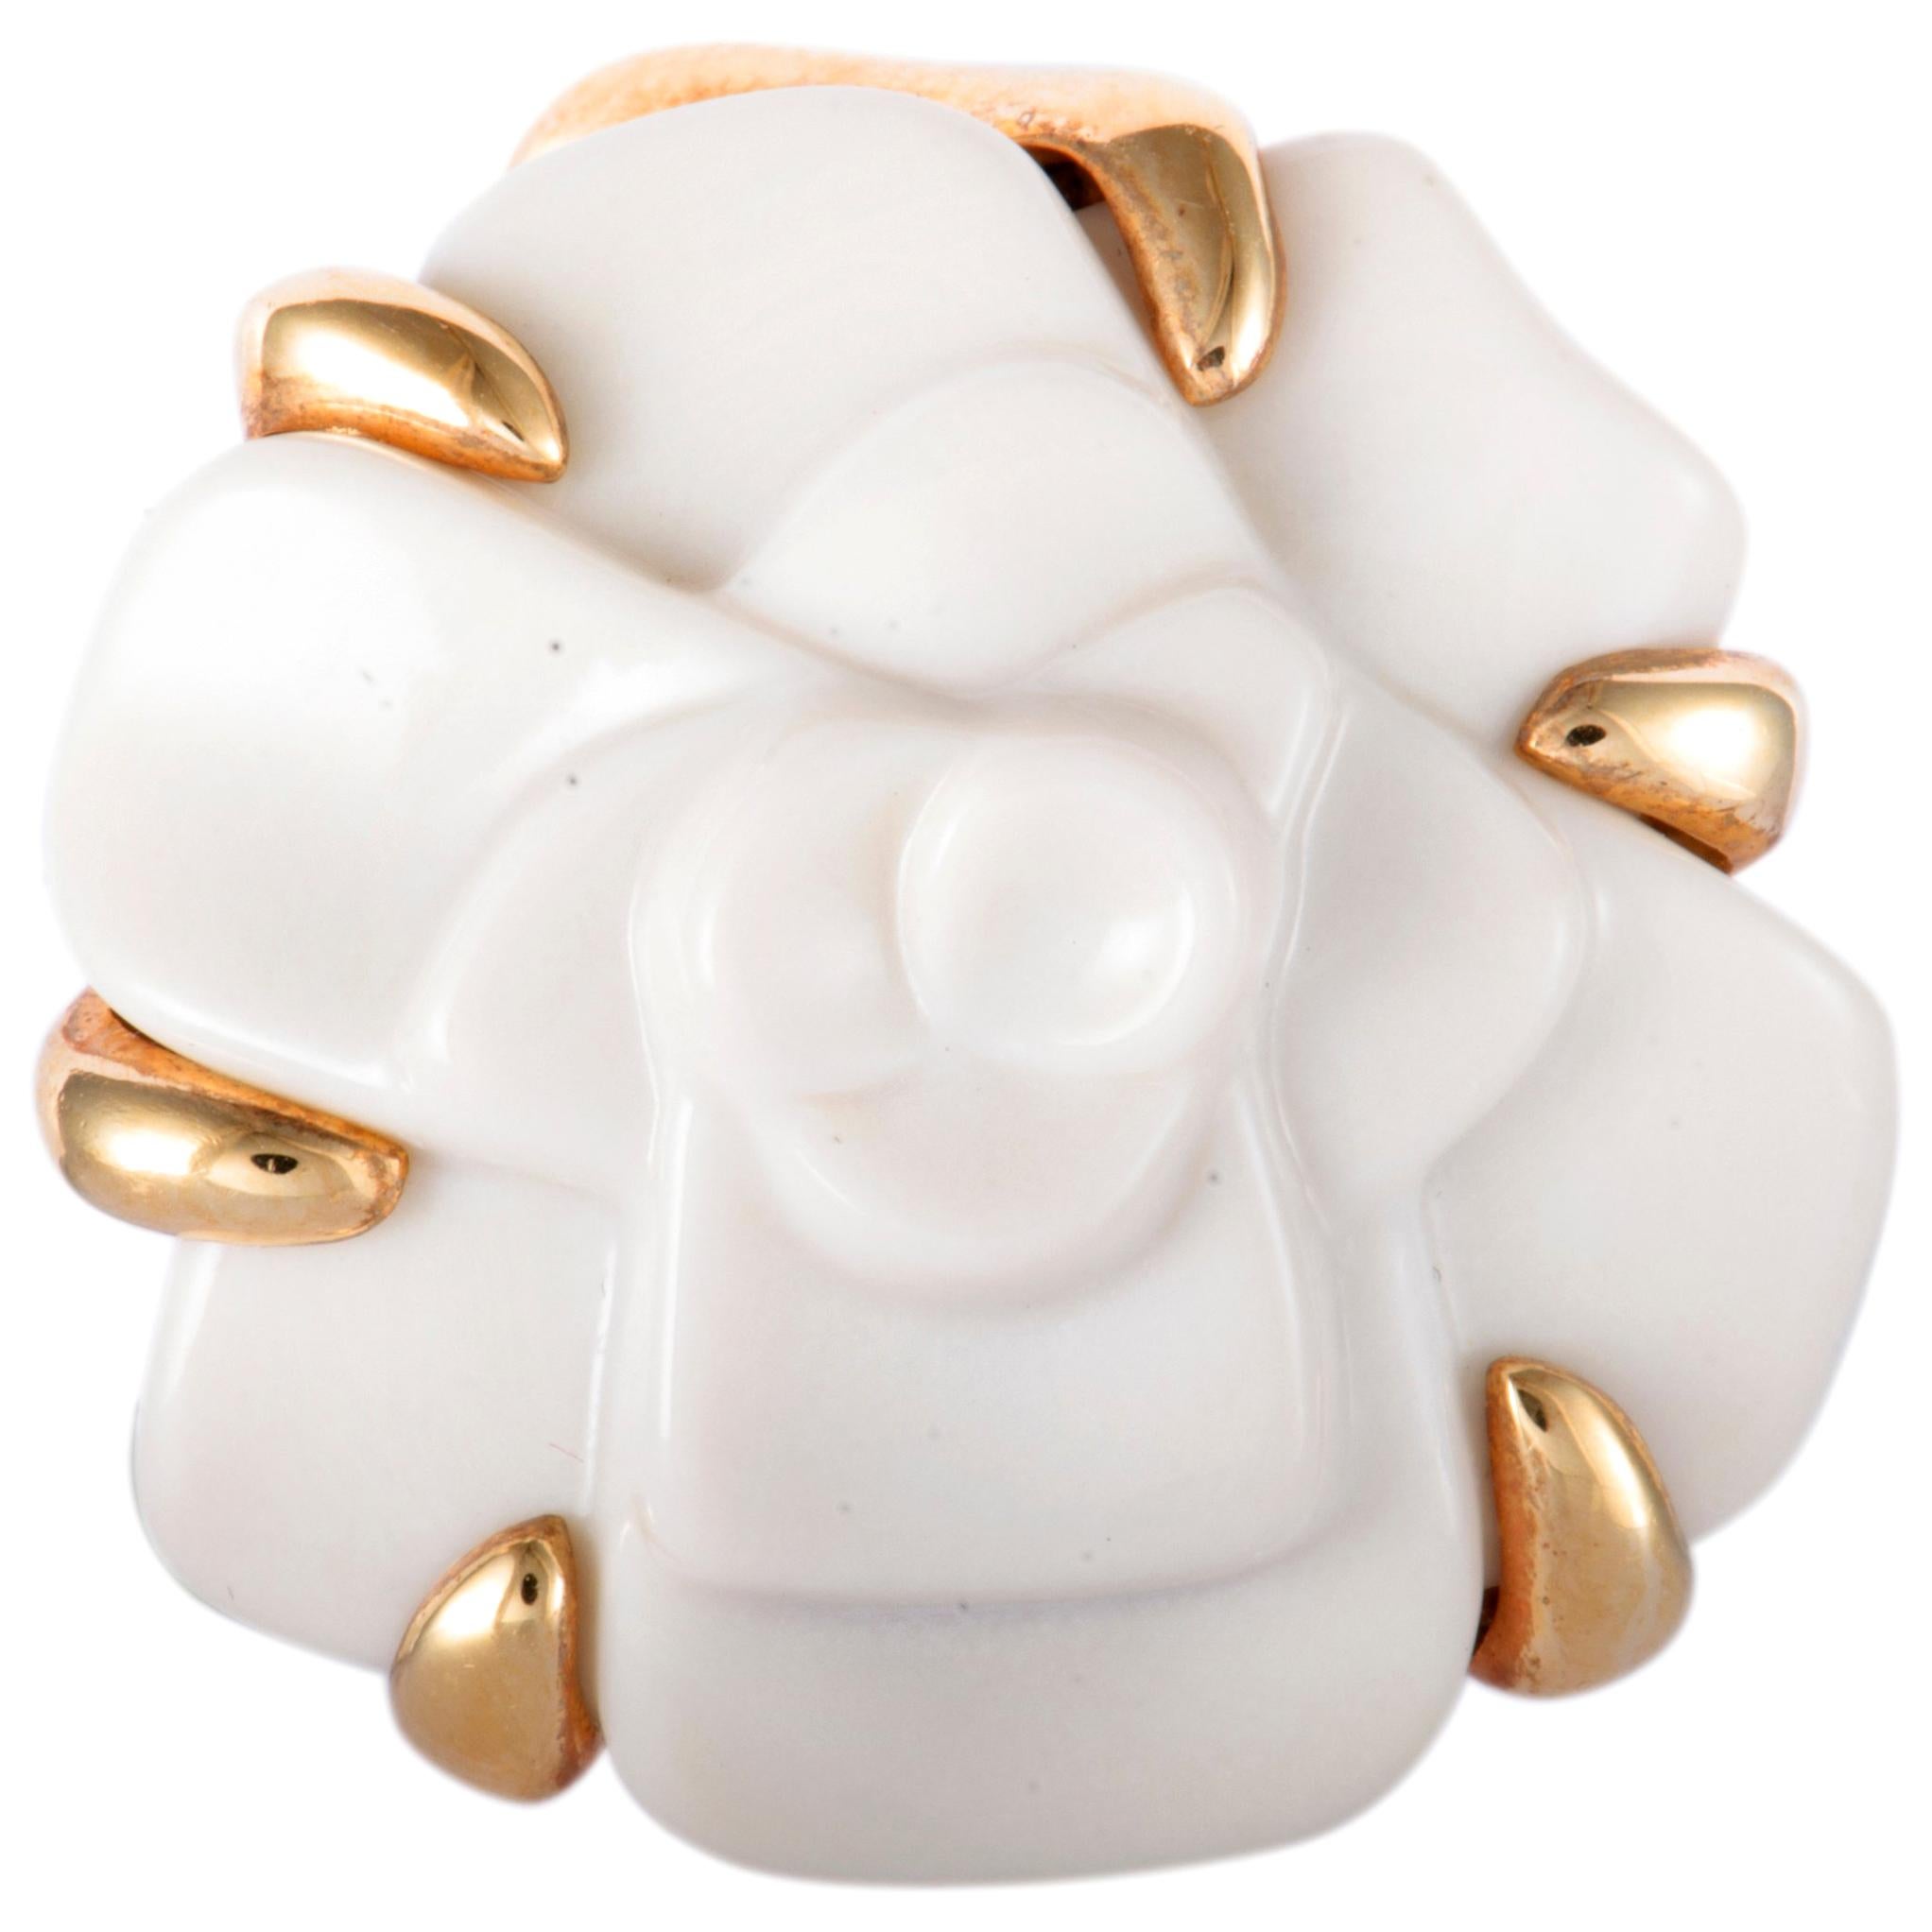 Chanel Camélia White Agate and Yellow Gold Flower Pendant